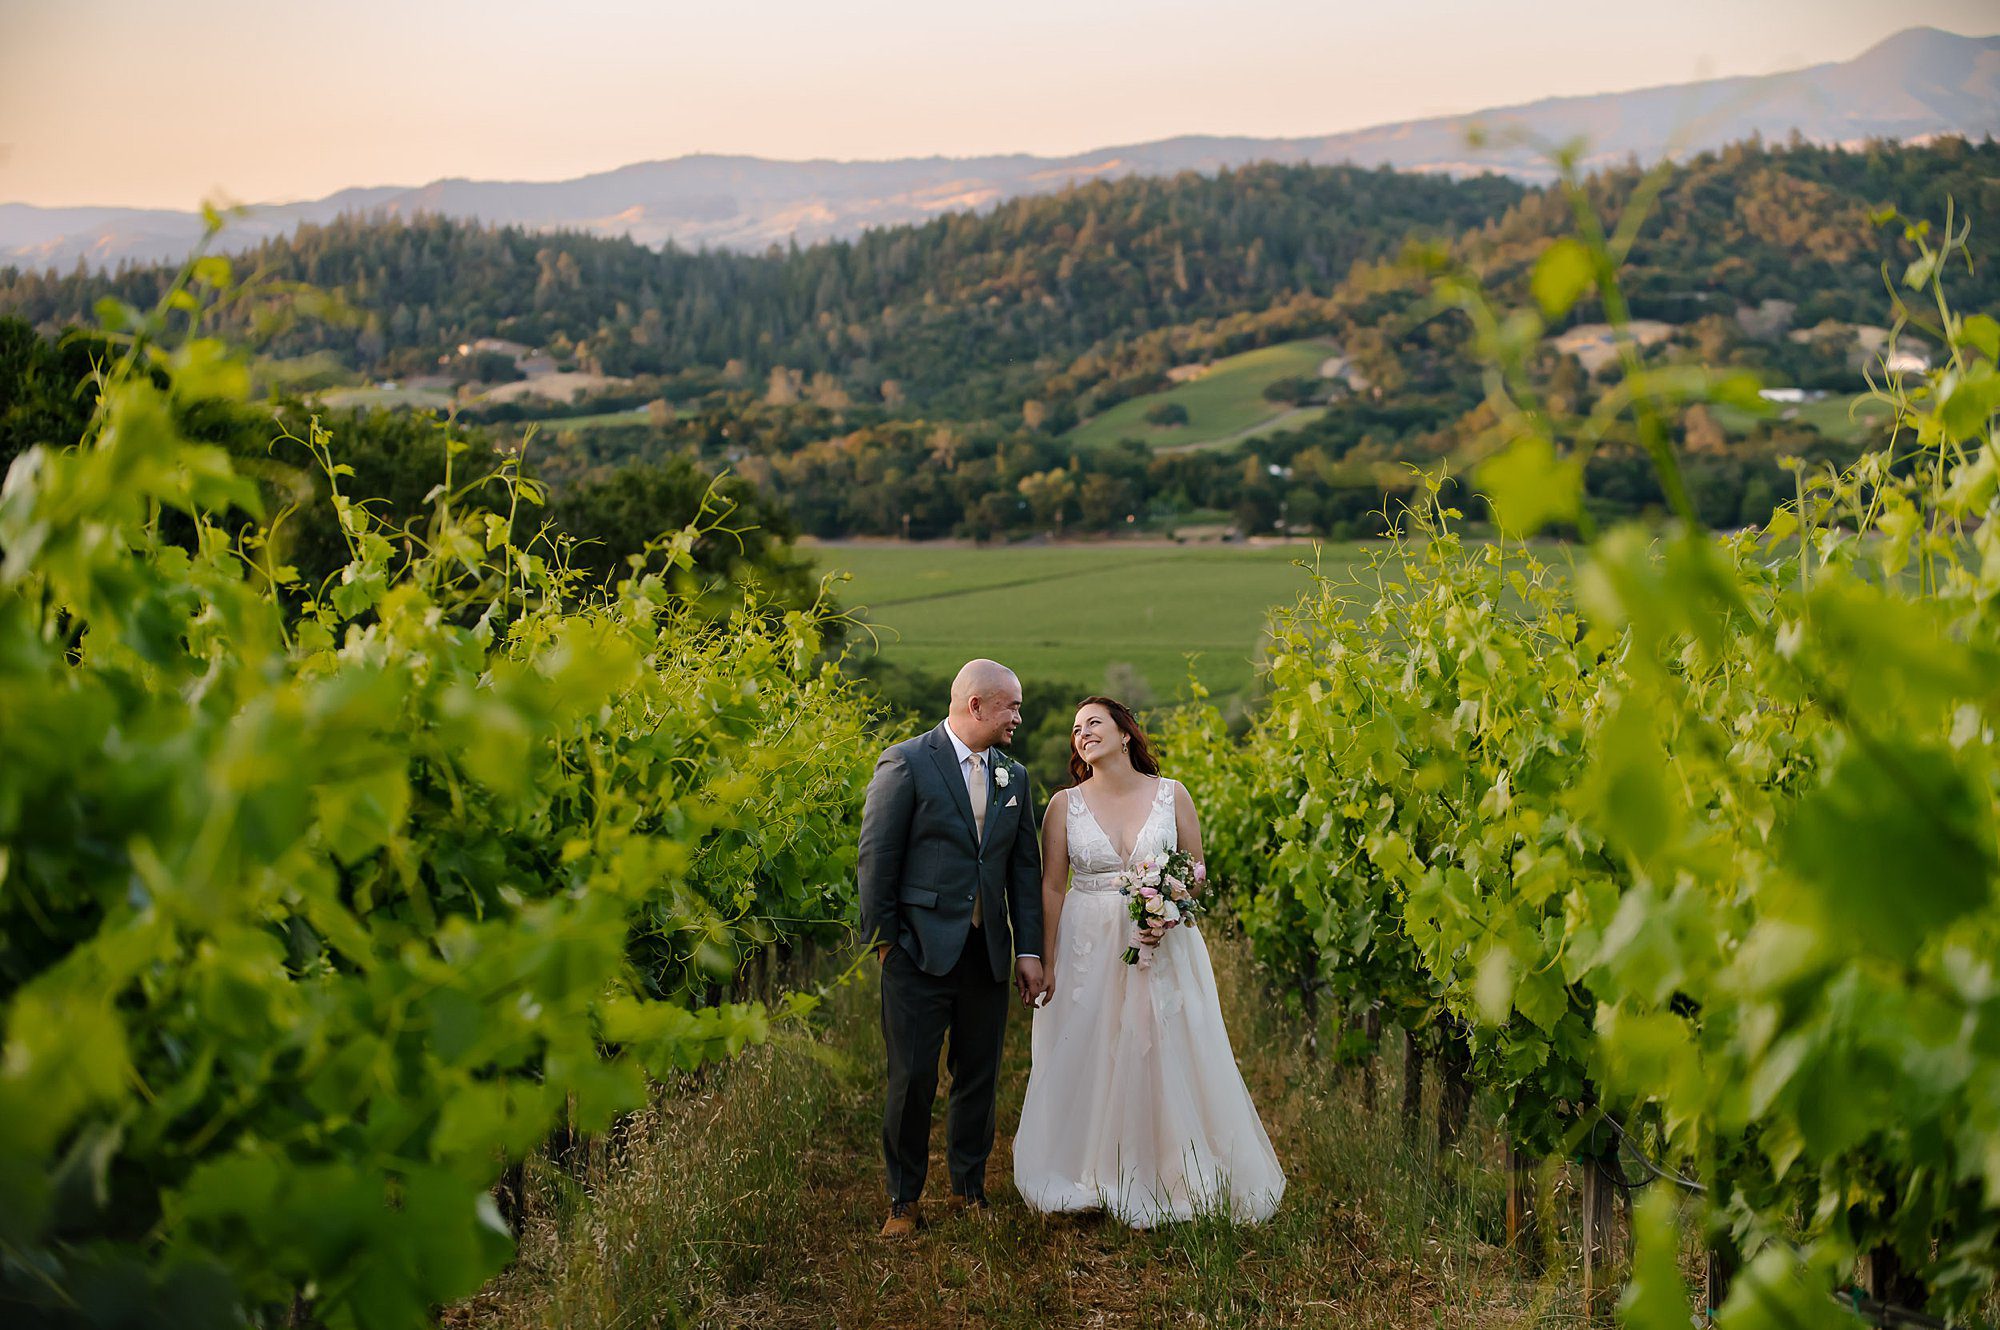 Dan and Megan holding hands in the vineyard during sunset, above Capo Creek winery with Sonoma County mountains in the background